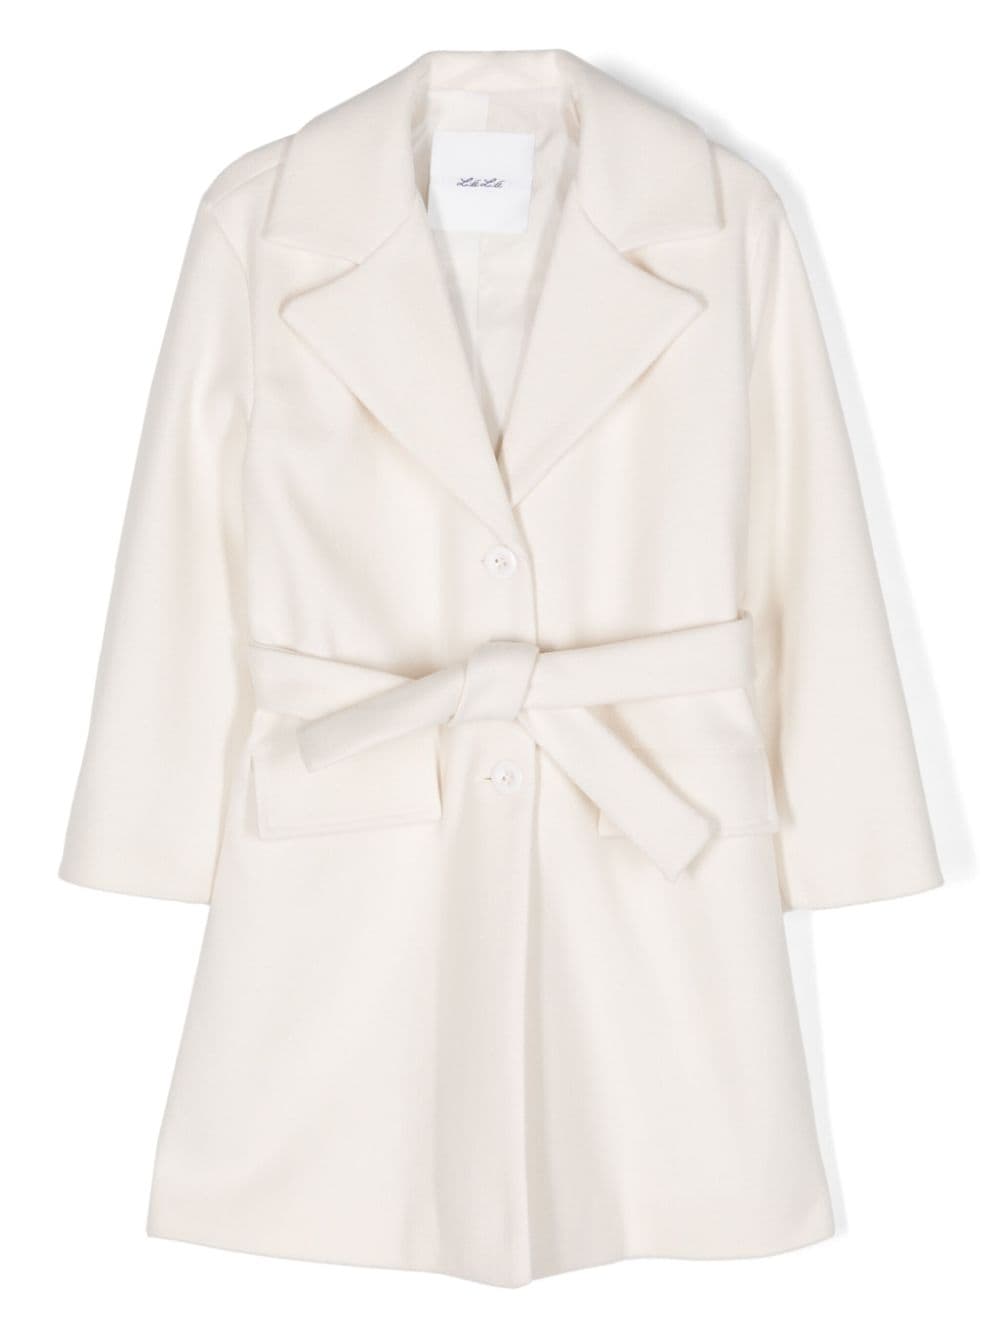 Image 1 of Miss Grant Kids single-breasted belted coat